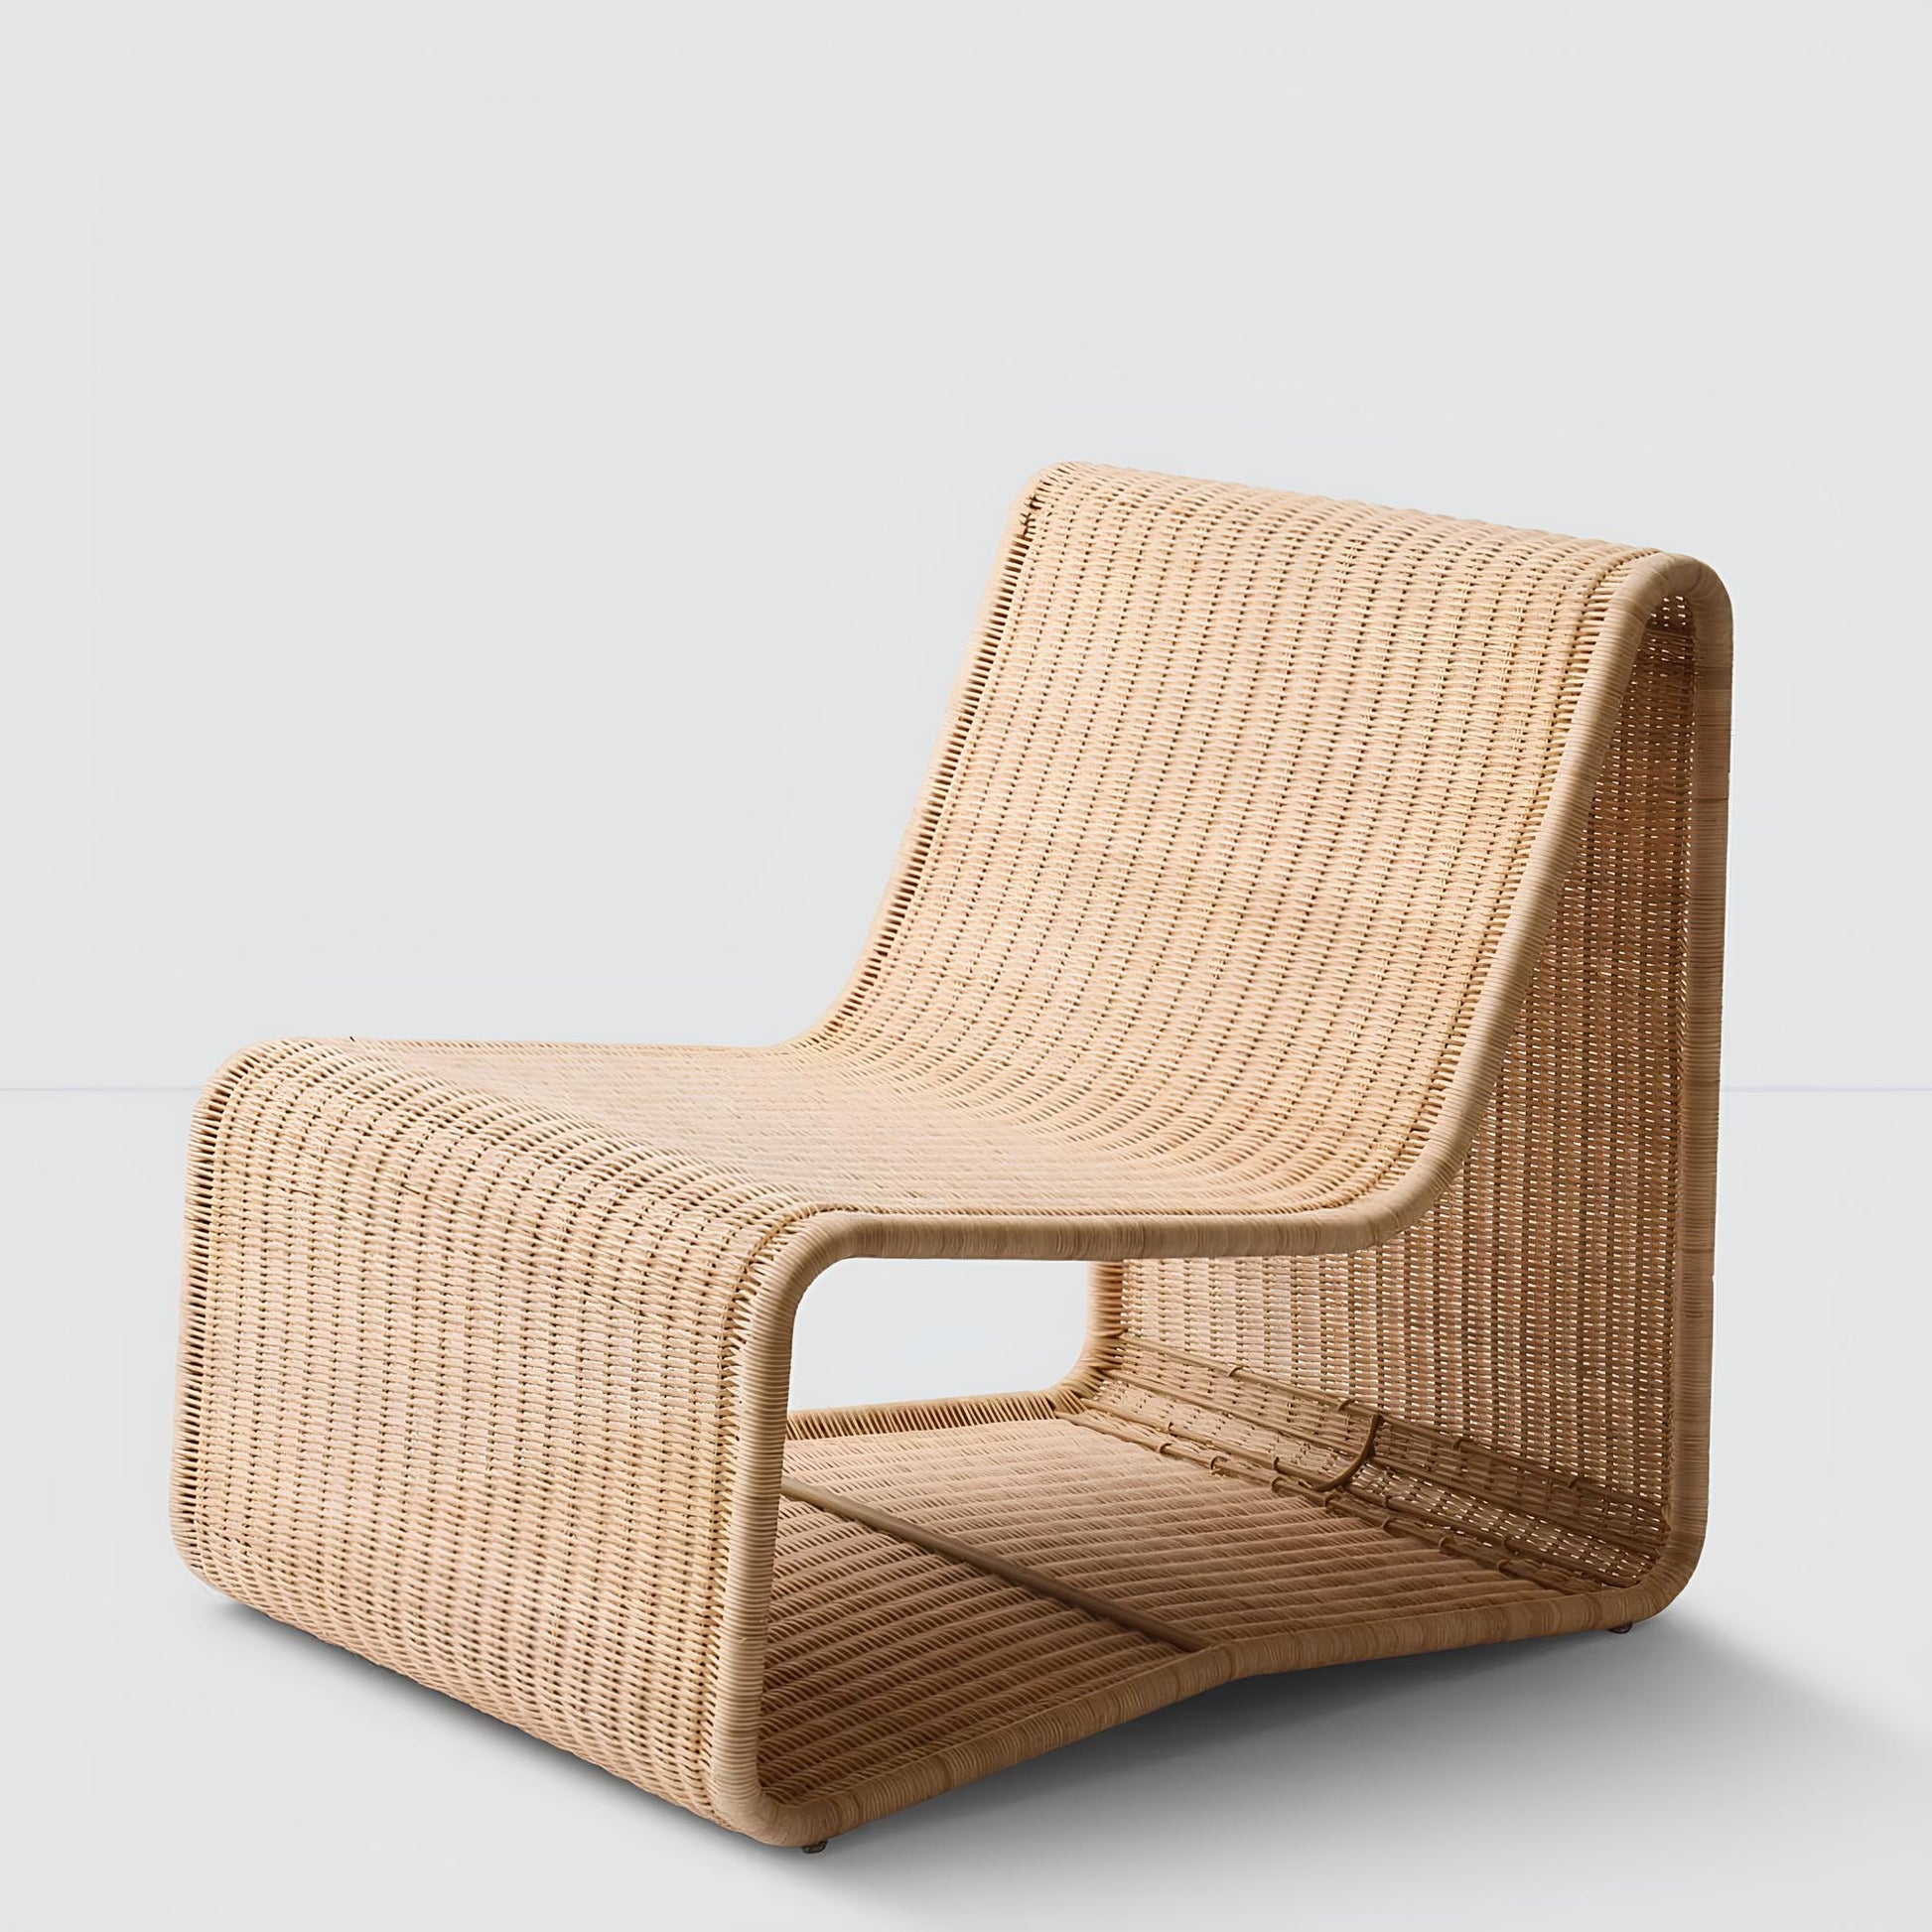 Wicker chairs for Lounge | Cane Chairs for garden - Navya - Akway